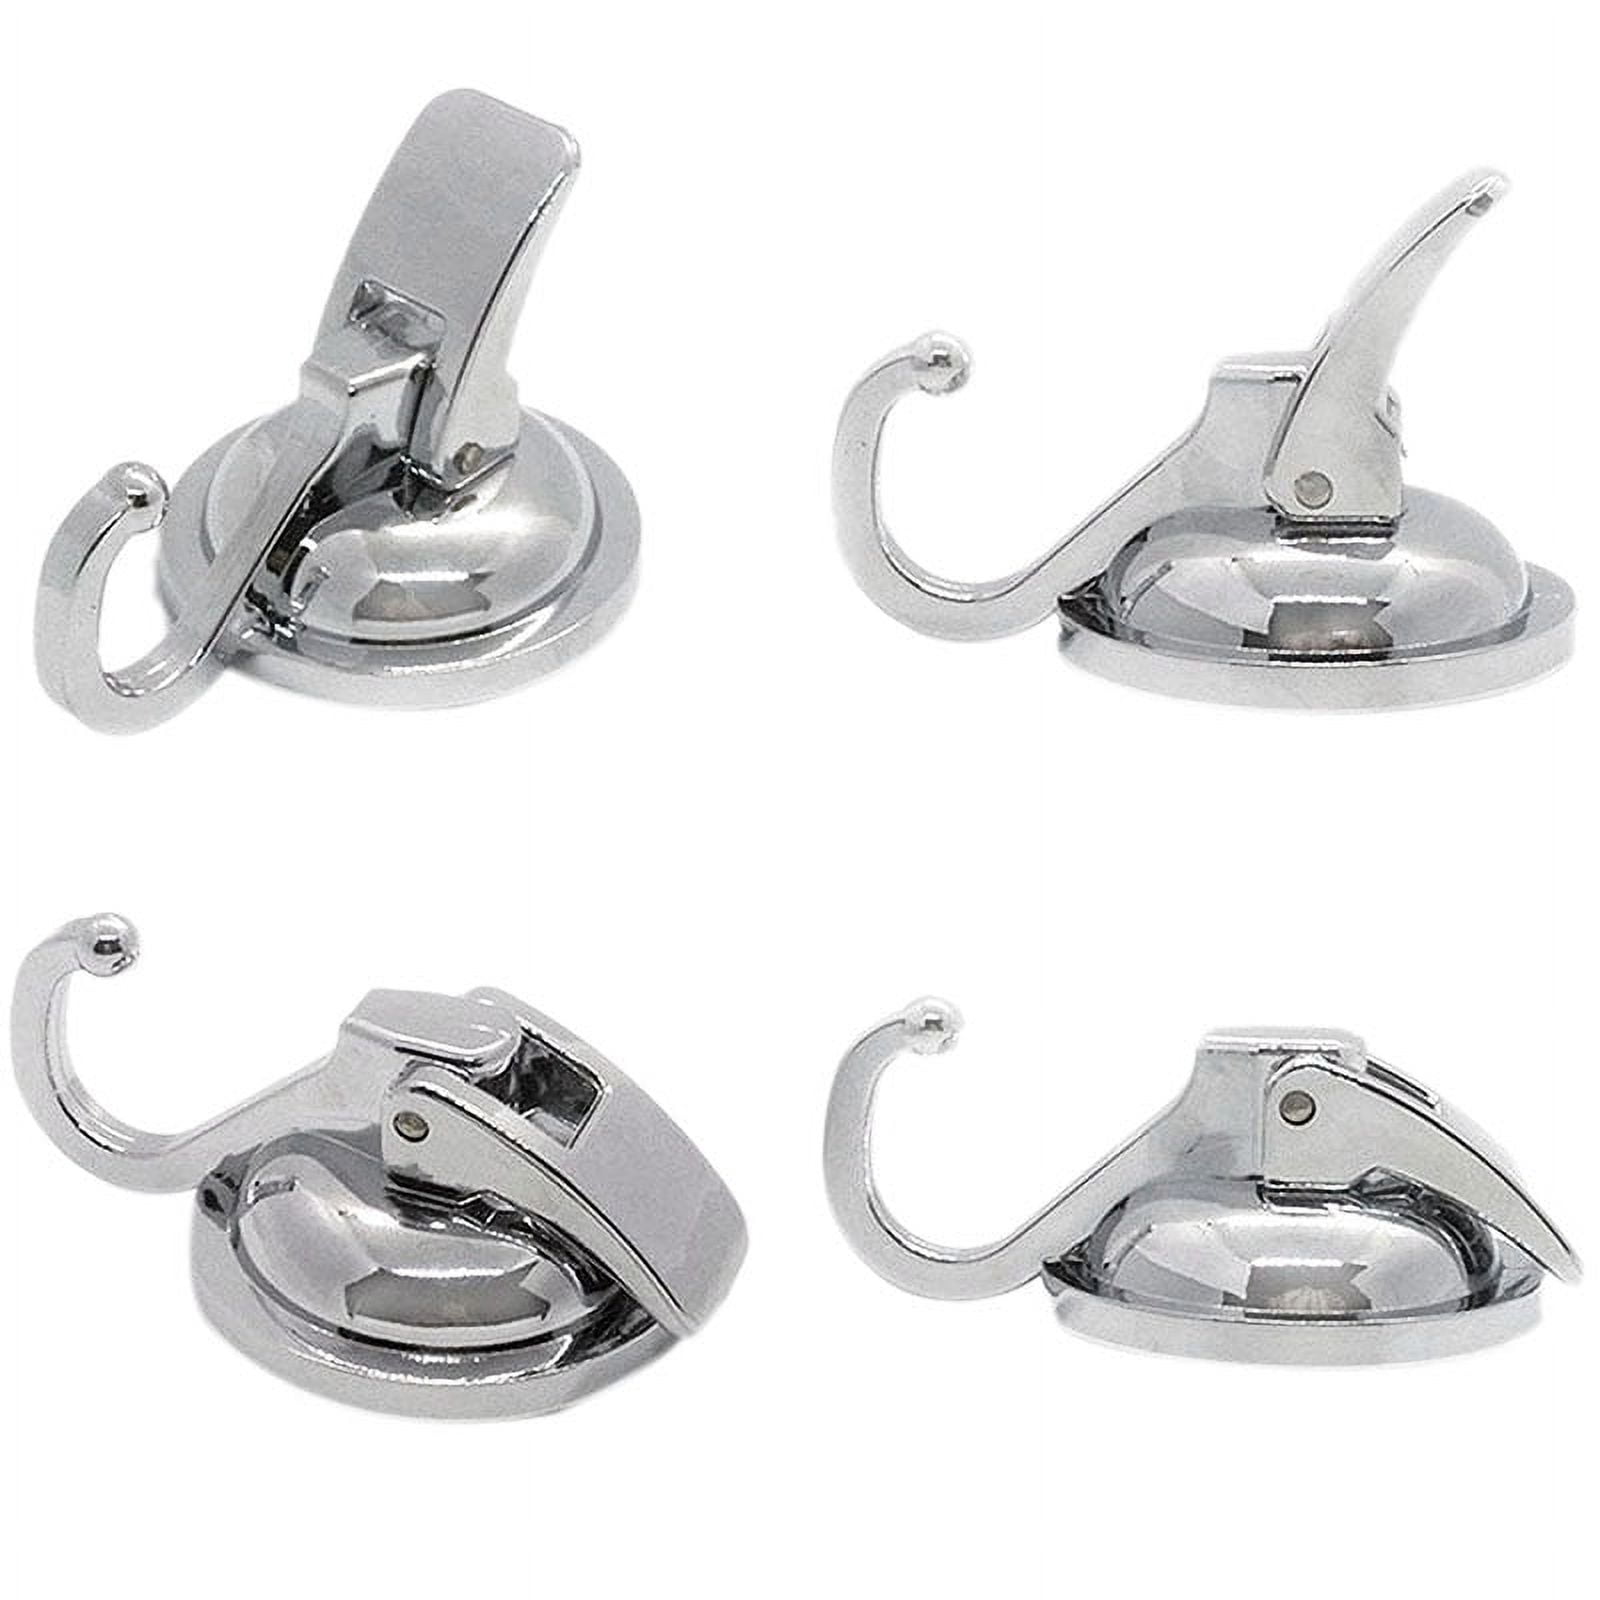 Chromed Vacuum Suction Cup Hook for Bathroom - China Suction Hook